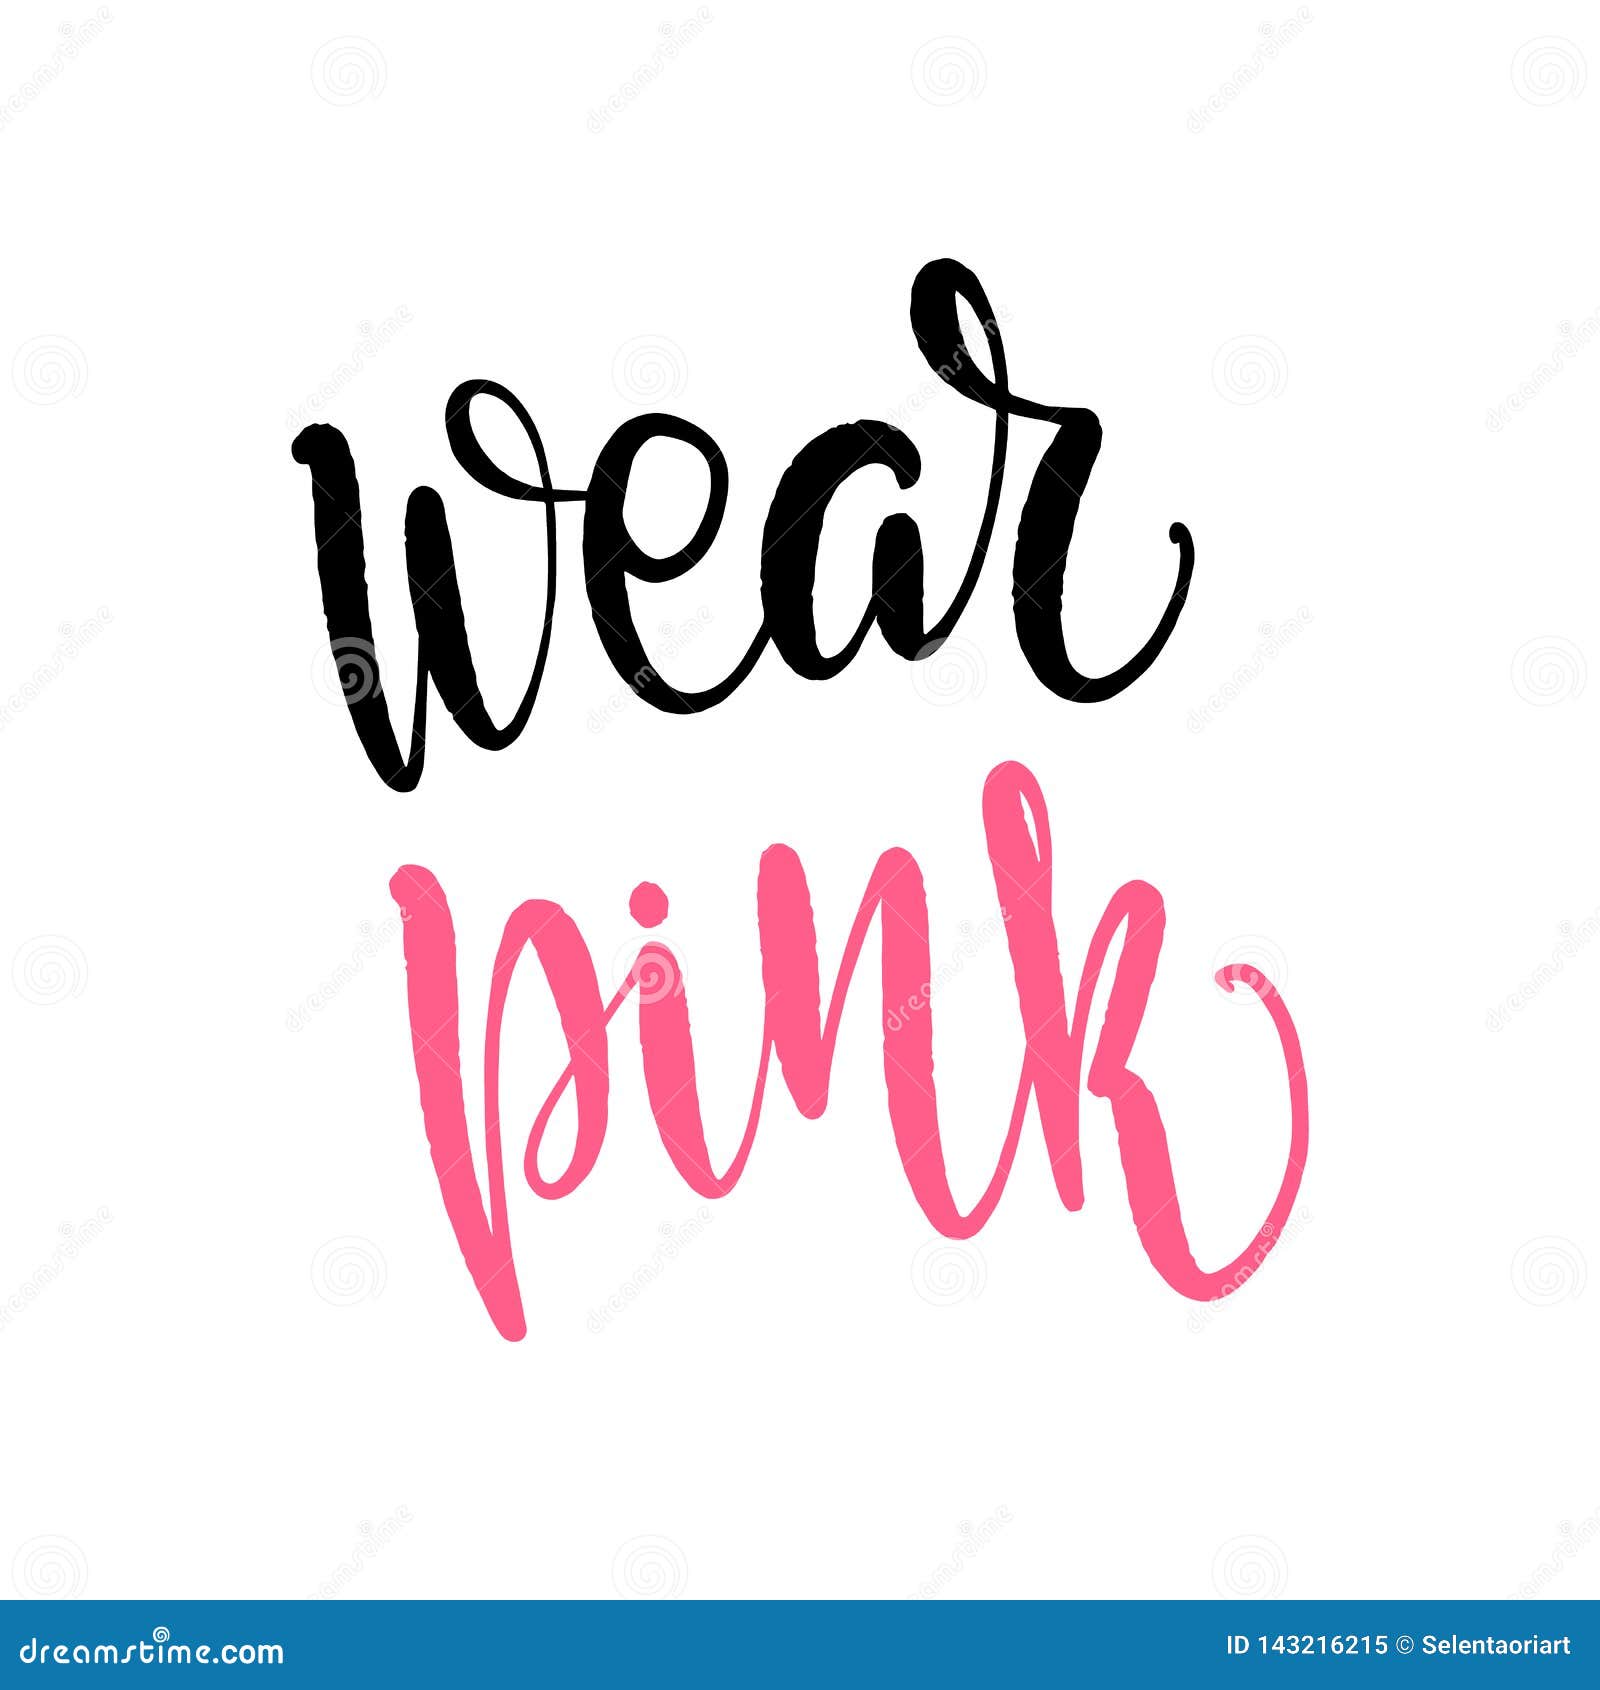 Lettering wear pink stock vector. Illustration of fashion - 143216215